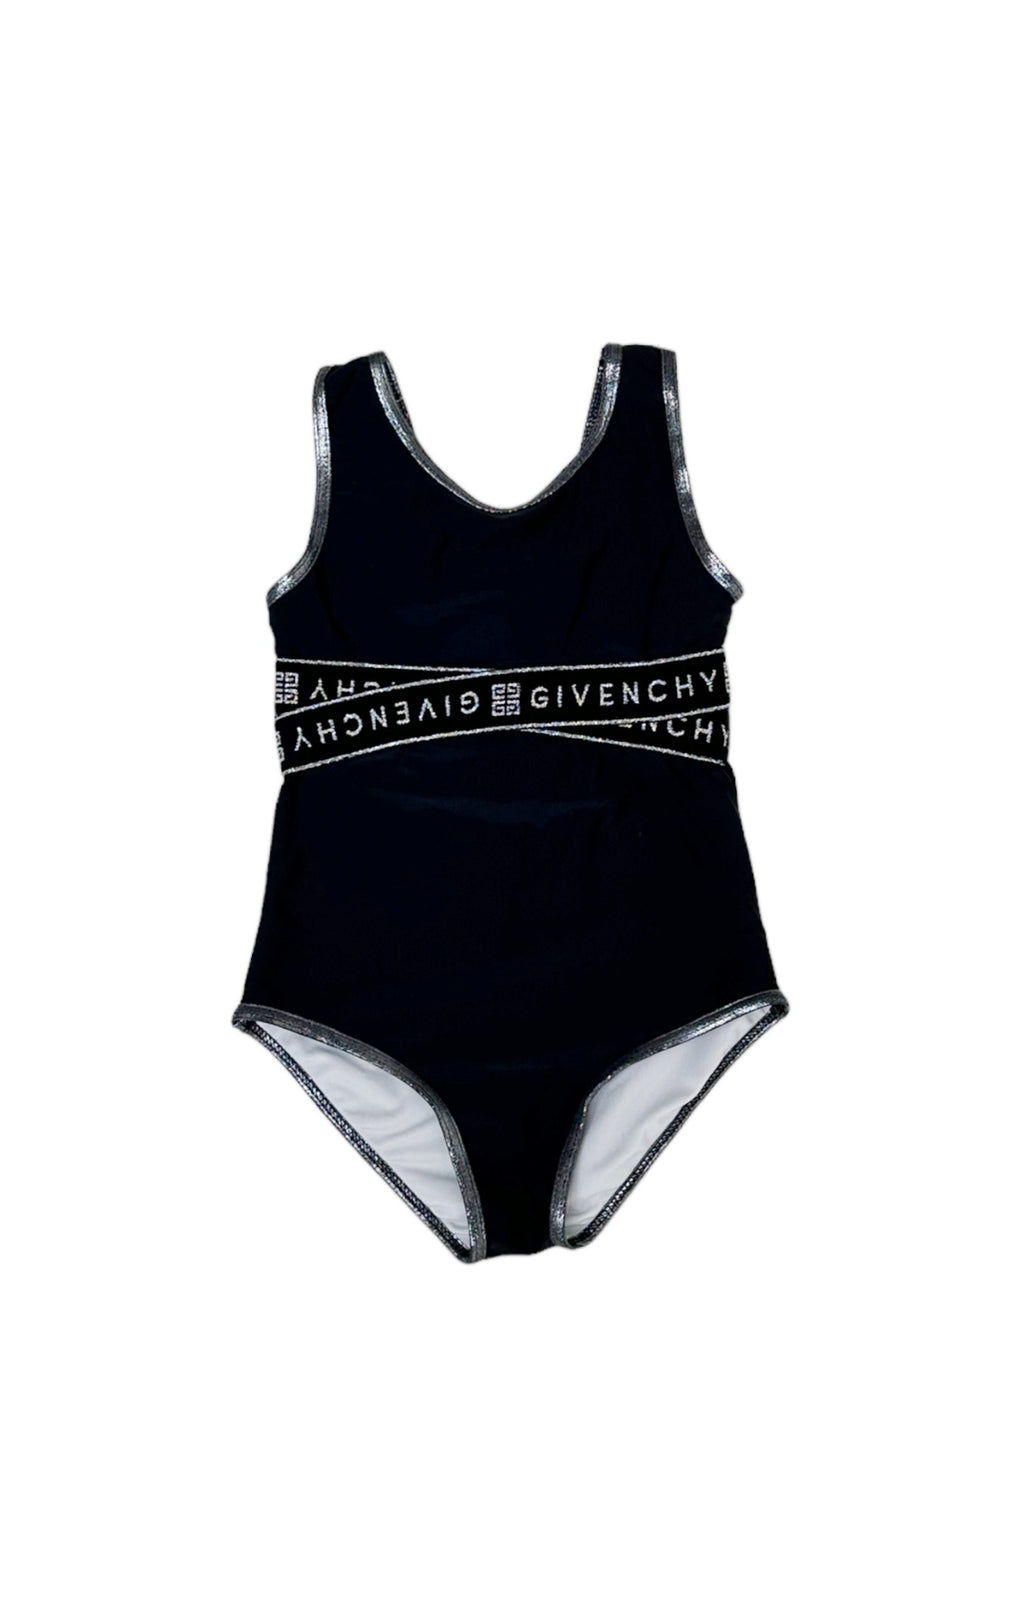 GIVENCHY (RARE) Swimsuit Size: No size tags, fits like 4 Years